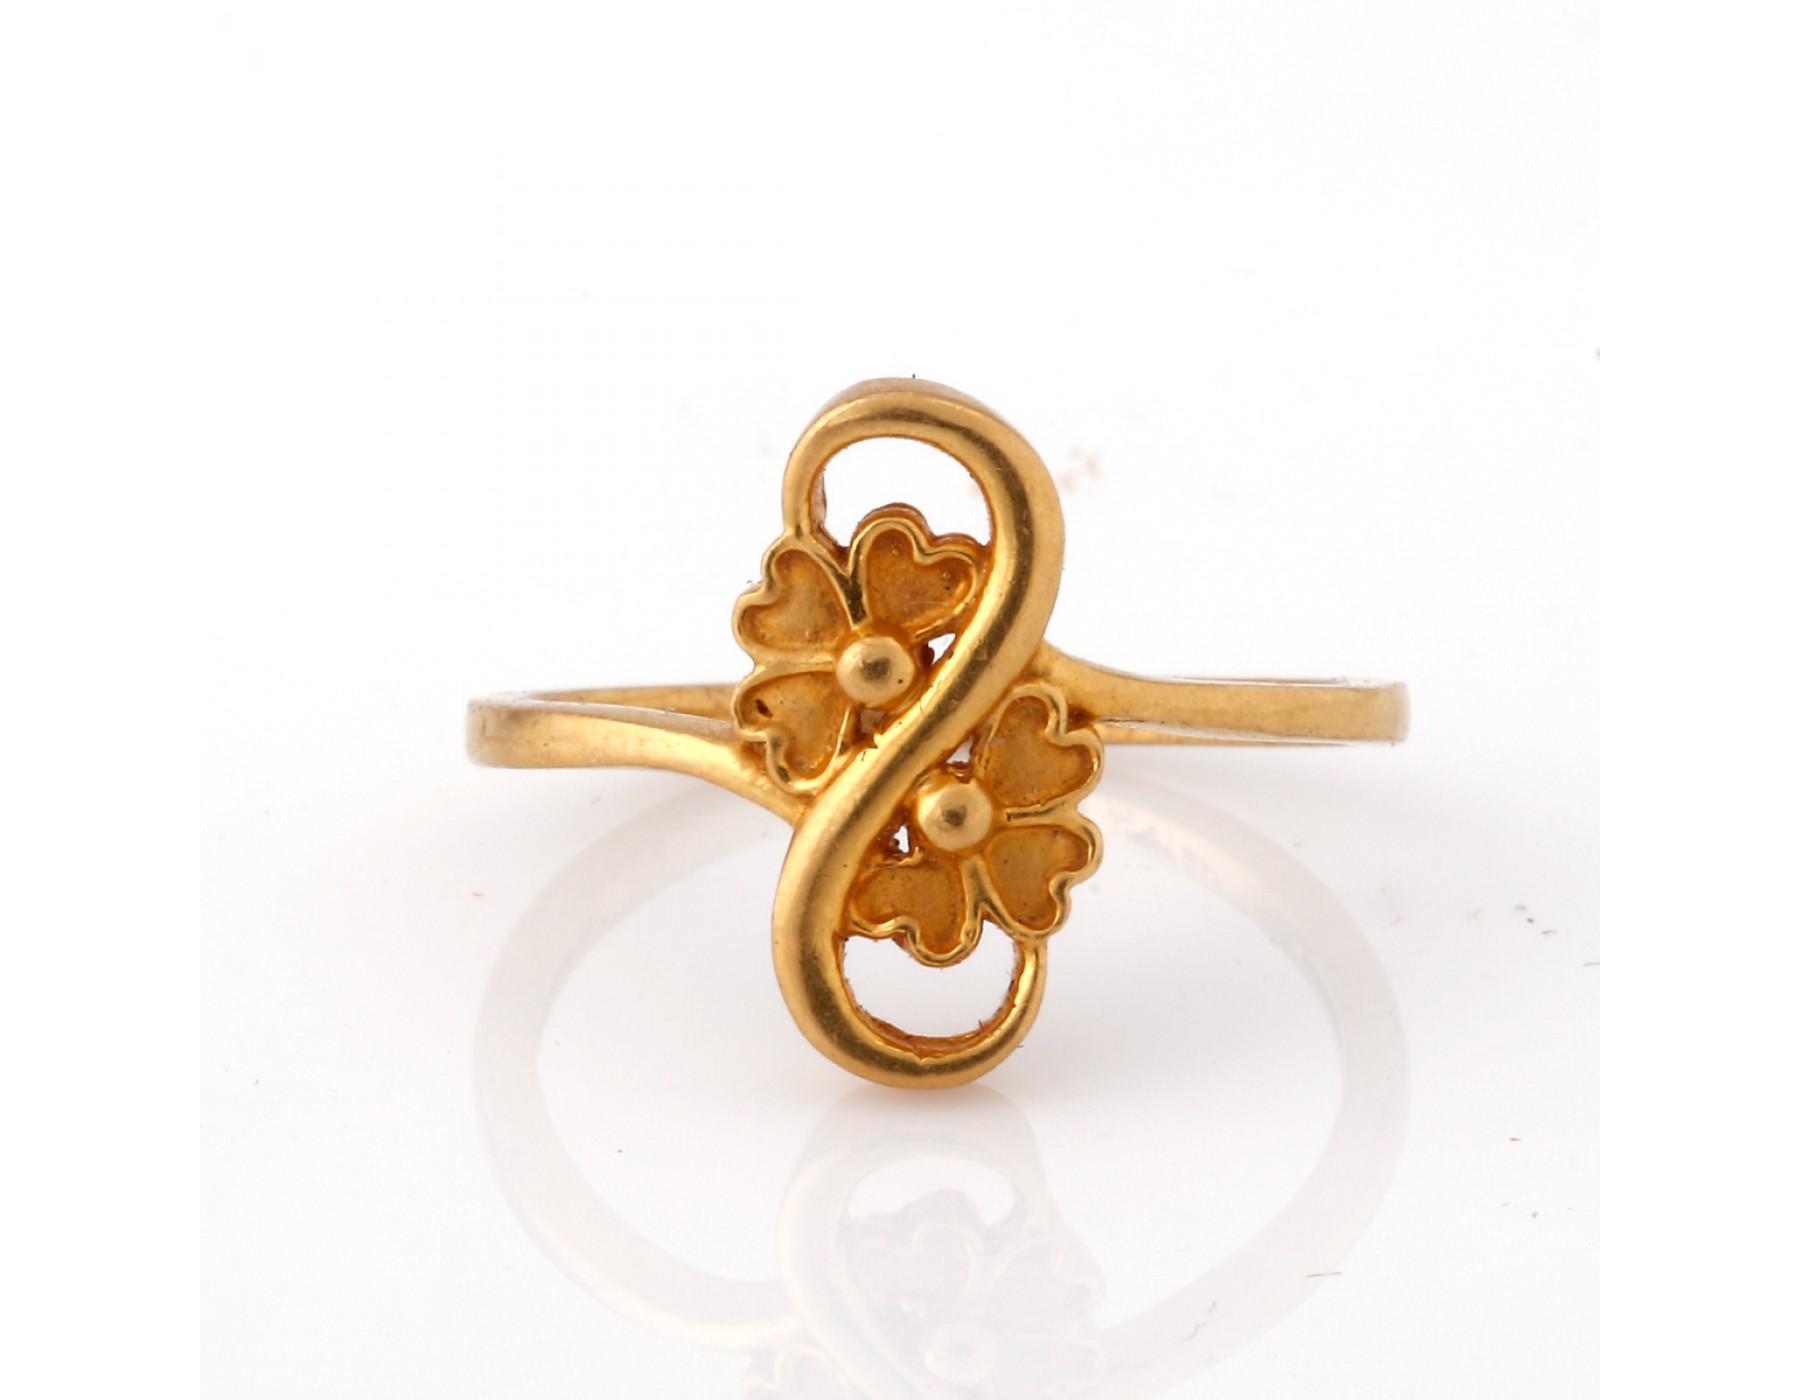 Latest Daily Wear Gold Rings Designs Without Stones For Women #gold #rings  - YouTube